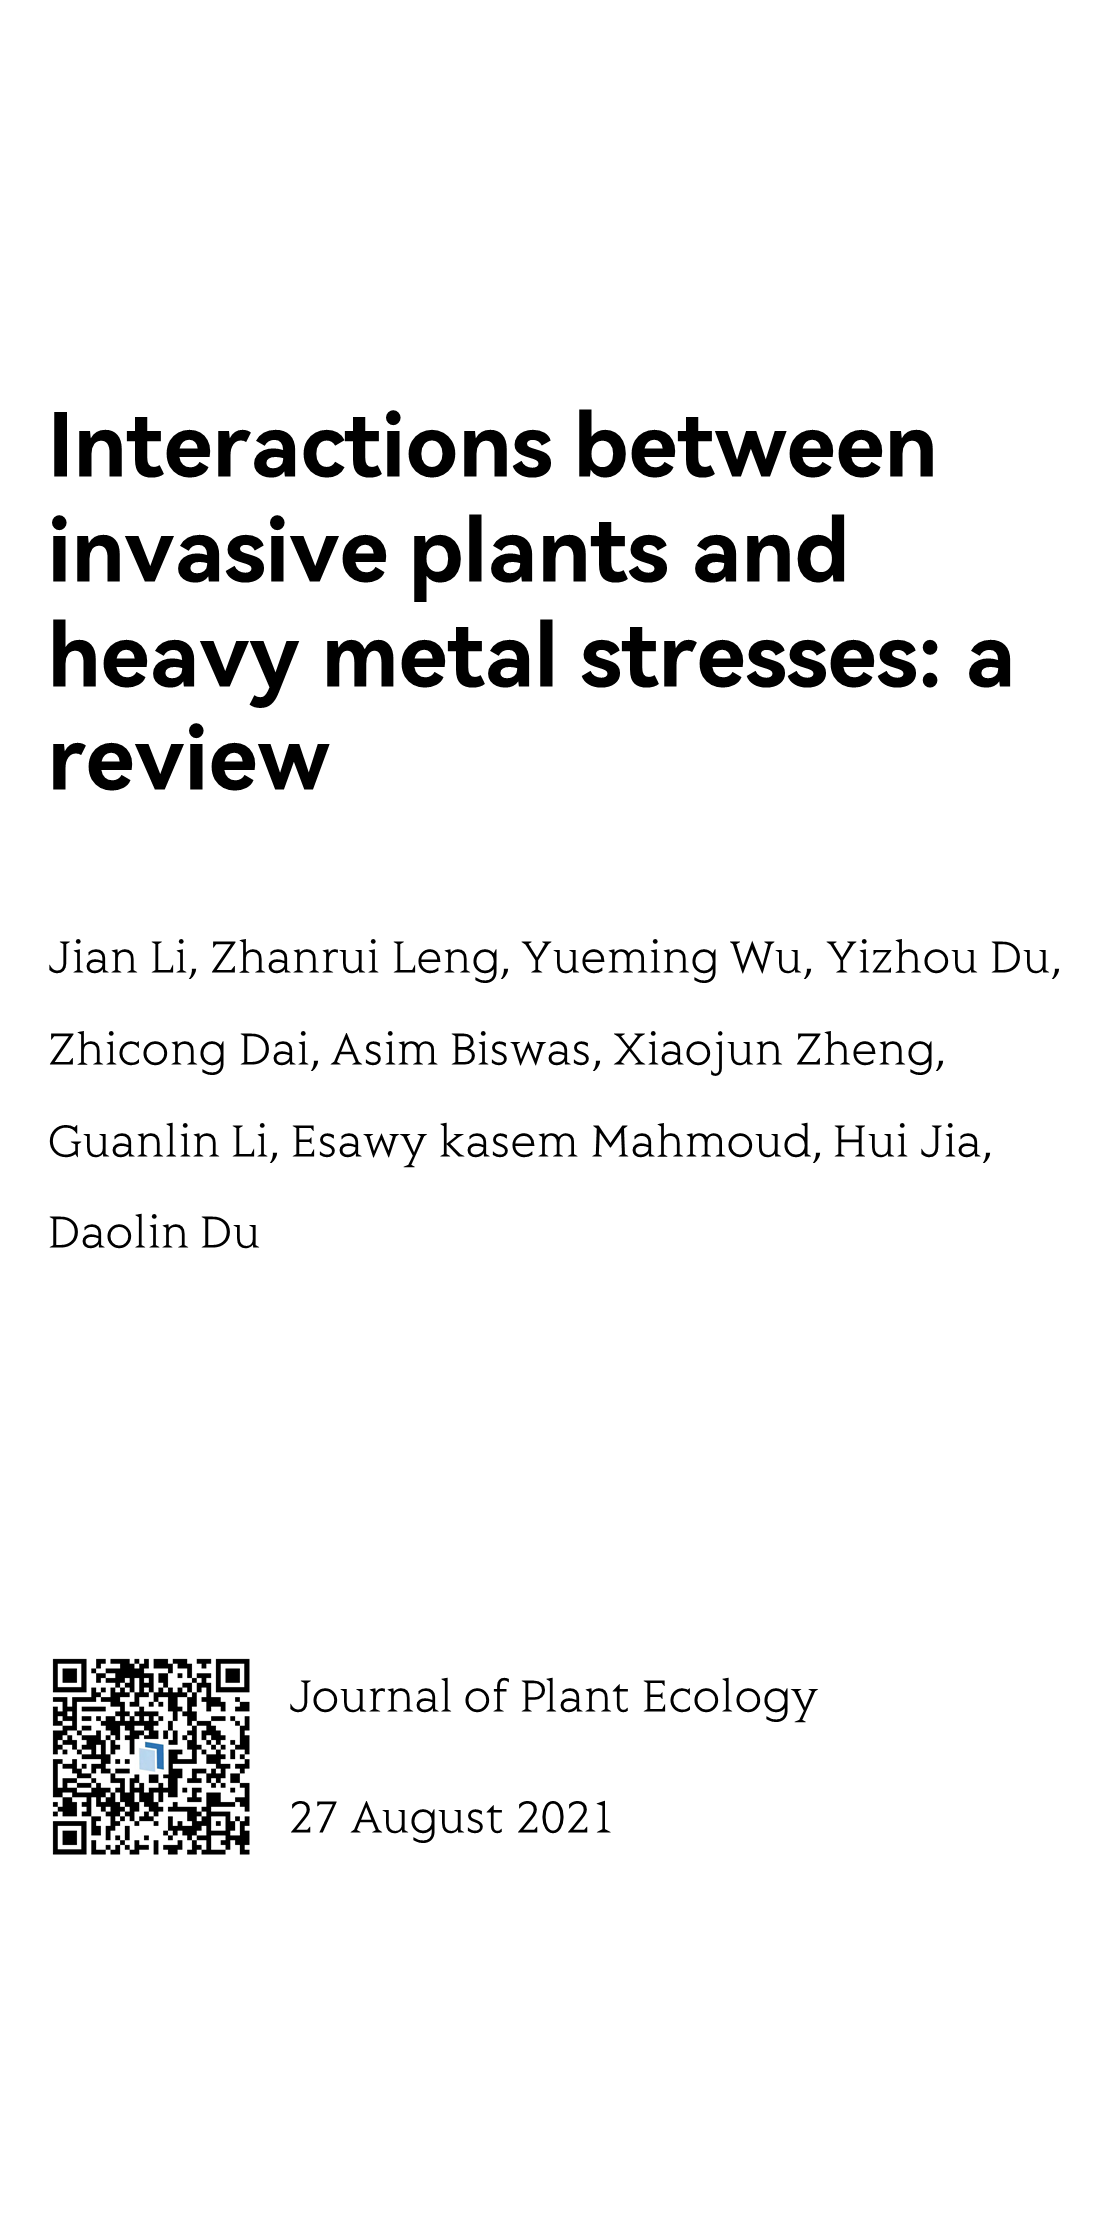 Interactions between invasive plants and heavy metal stresses: a review_1